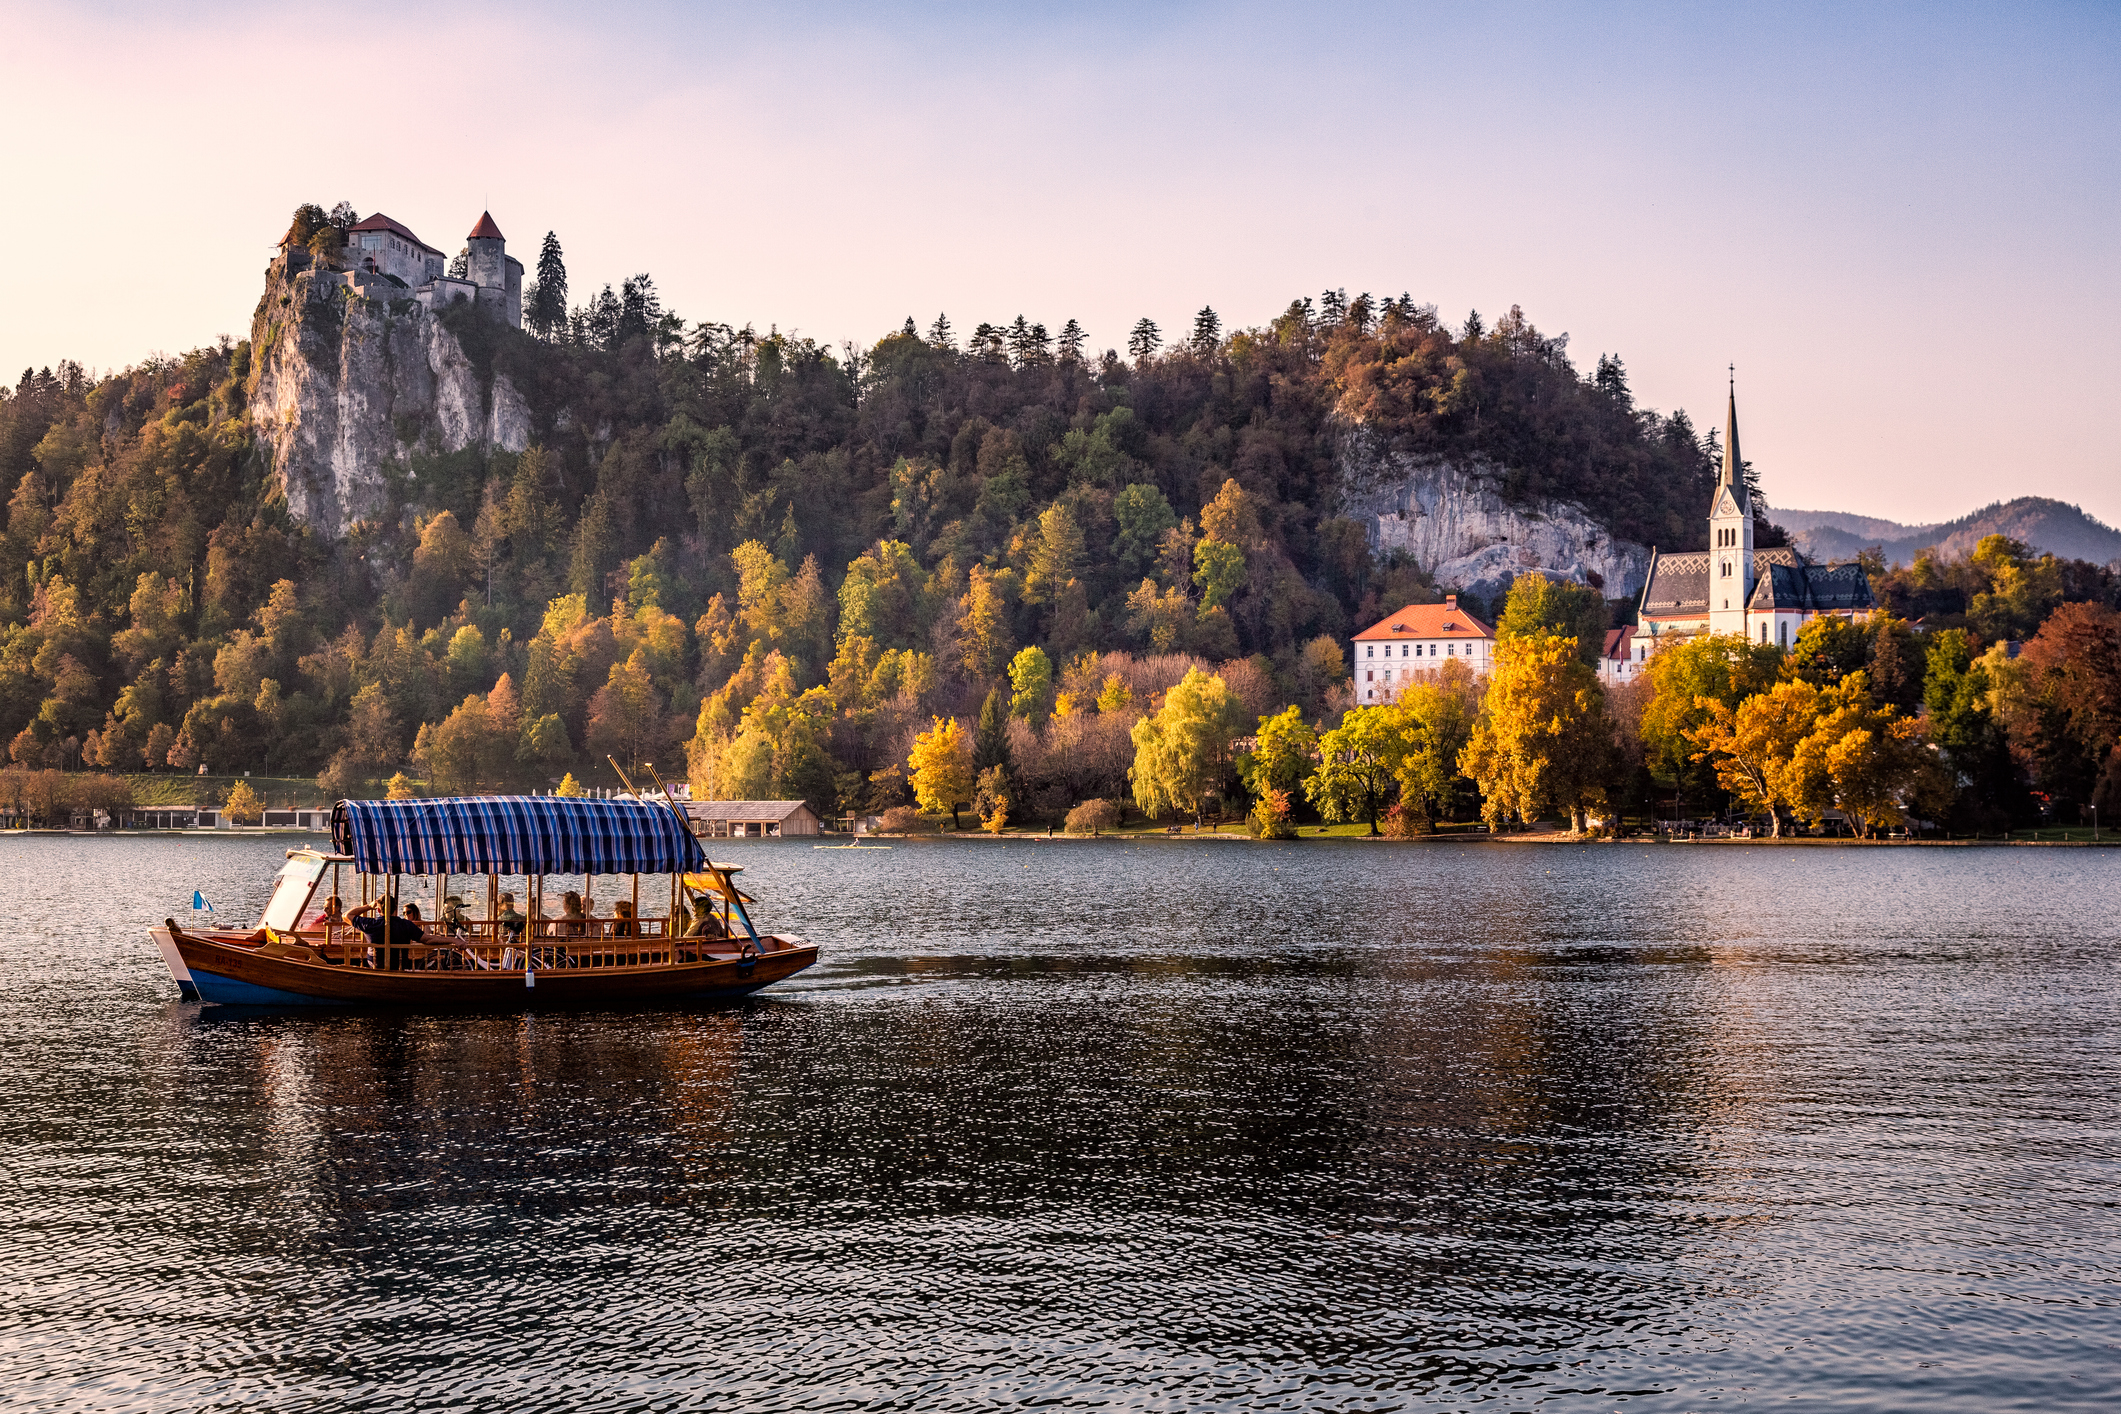 Traditional boat on a calm lake with a castle on a hill and a church spire in the background, conveying a serene travel scene